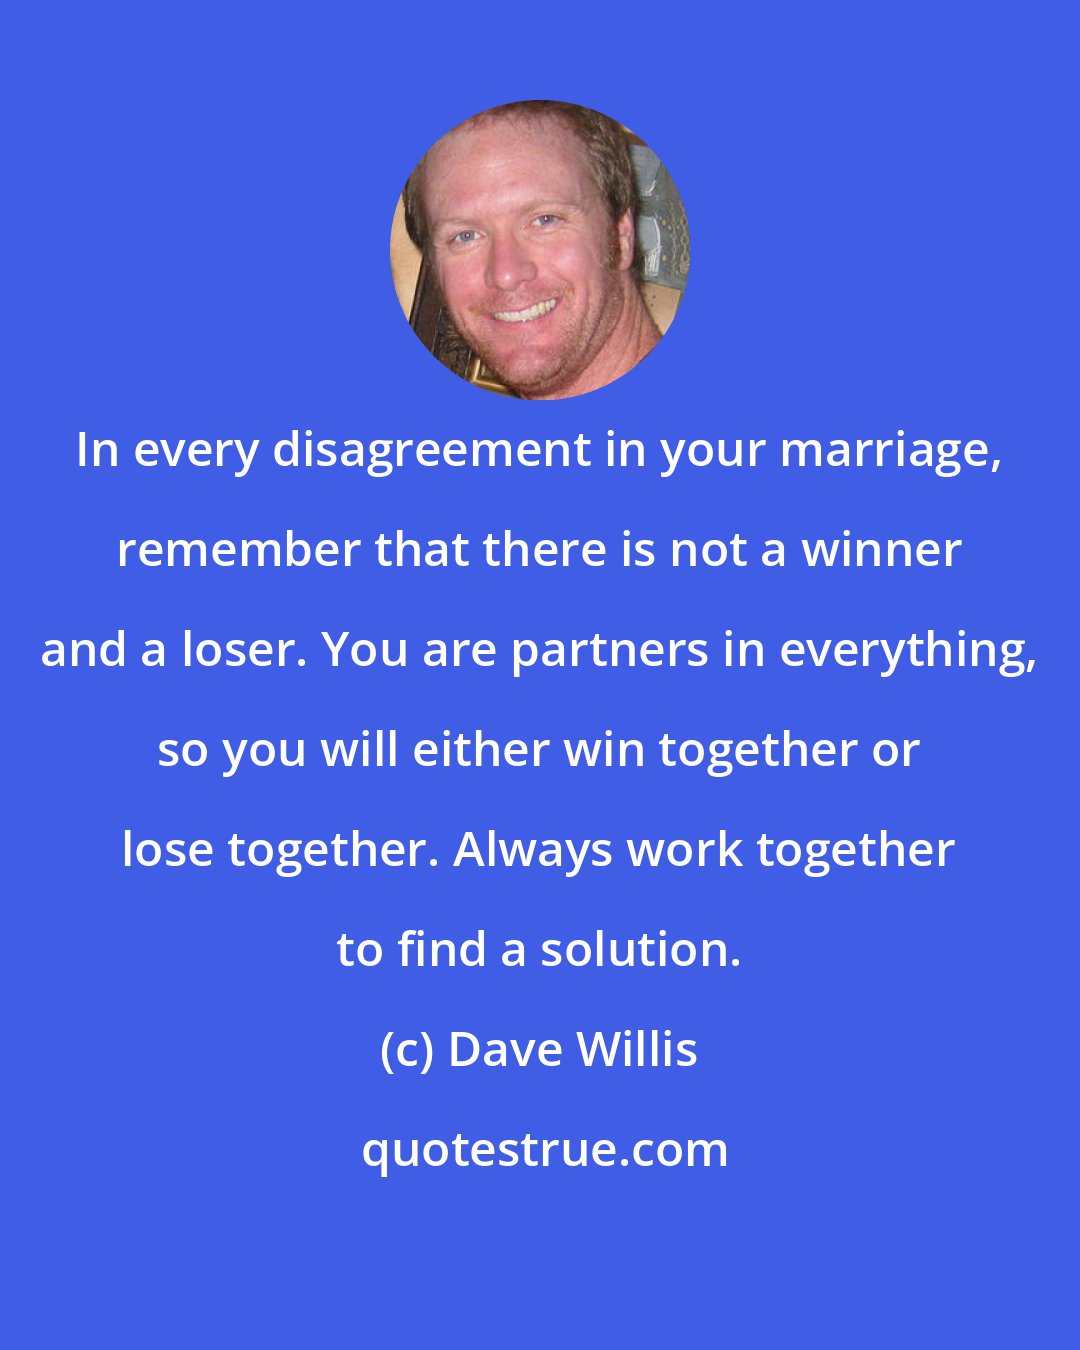 Dave Willis: In every disagreement in your marriage, remember that there is not a winner and a loser. You are partners in everything, so you will either win together or lose together. Always work together to find a solution.